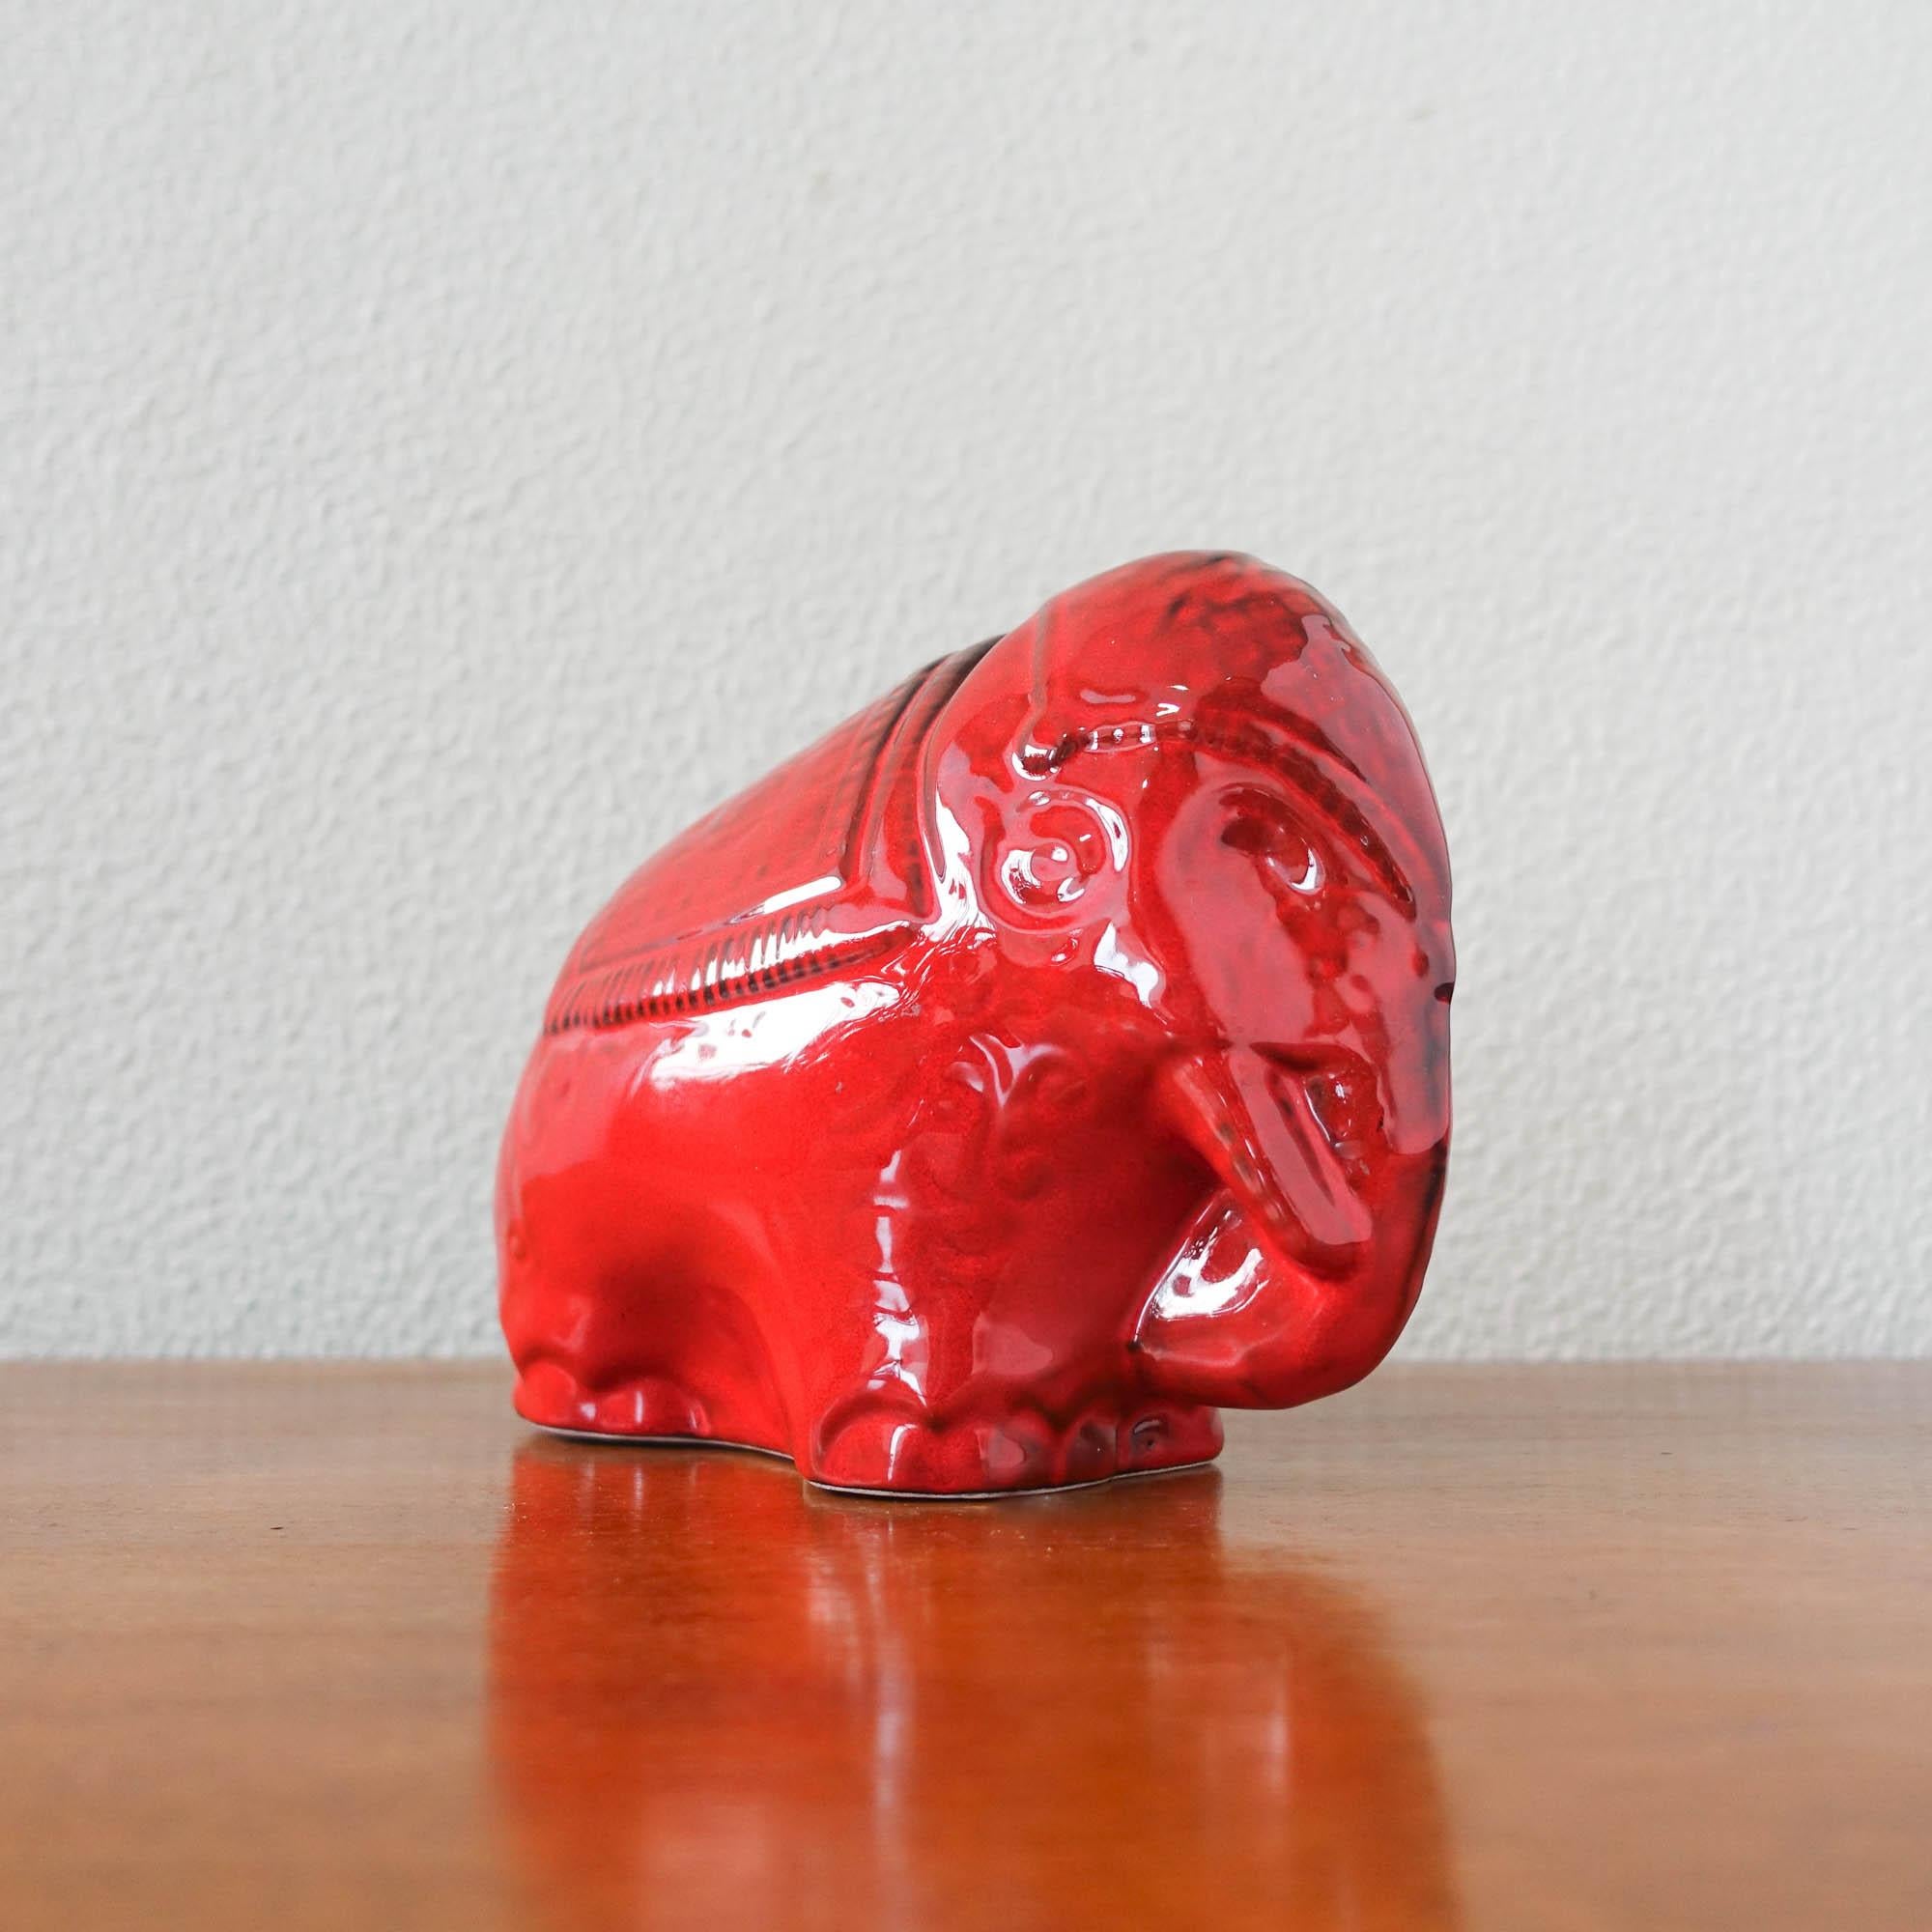 Mid-Century Modern Vintage Red Glaze Ceramic Elephant in Bitossi Style, 1970's For Sale